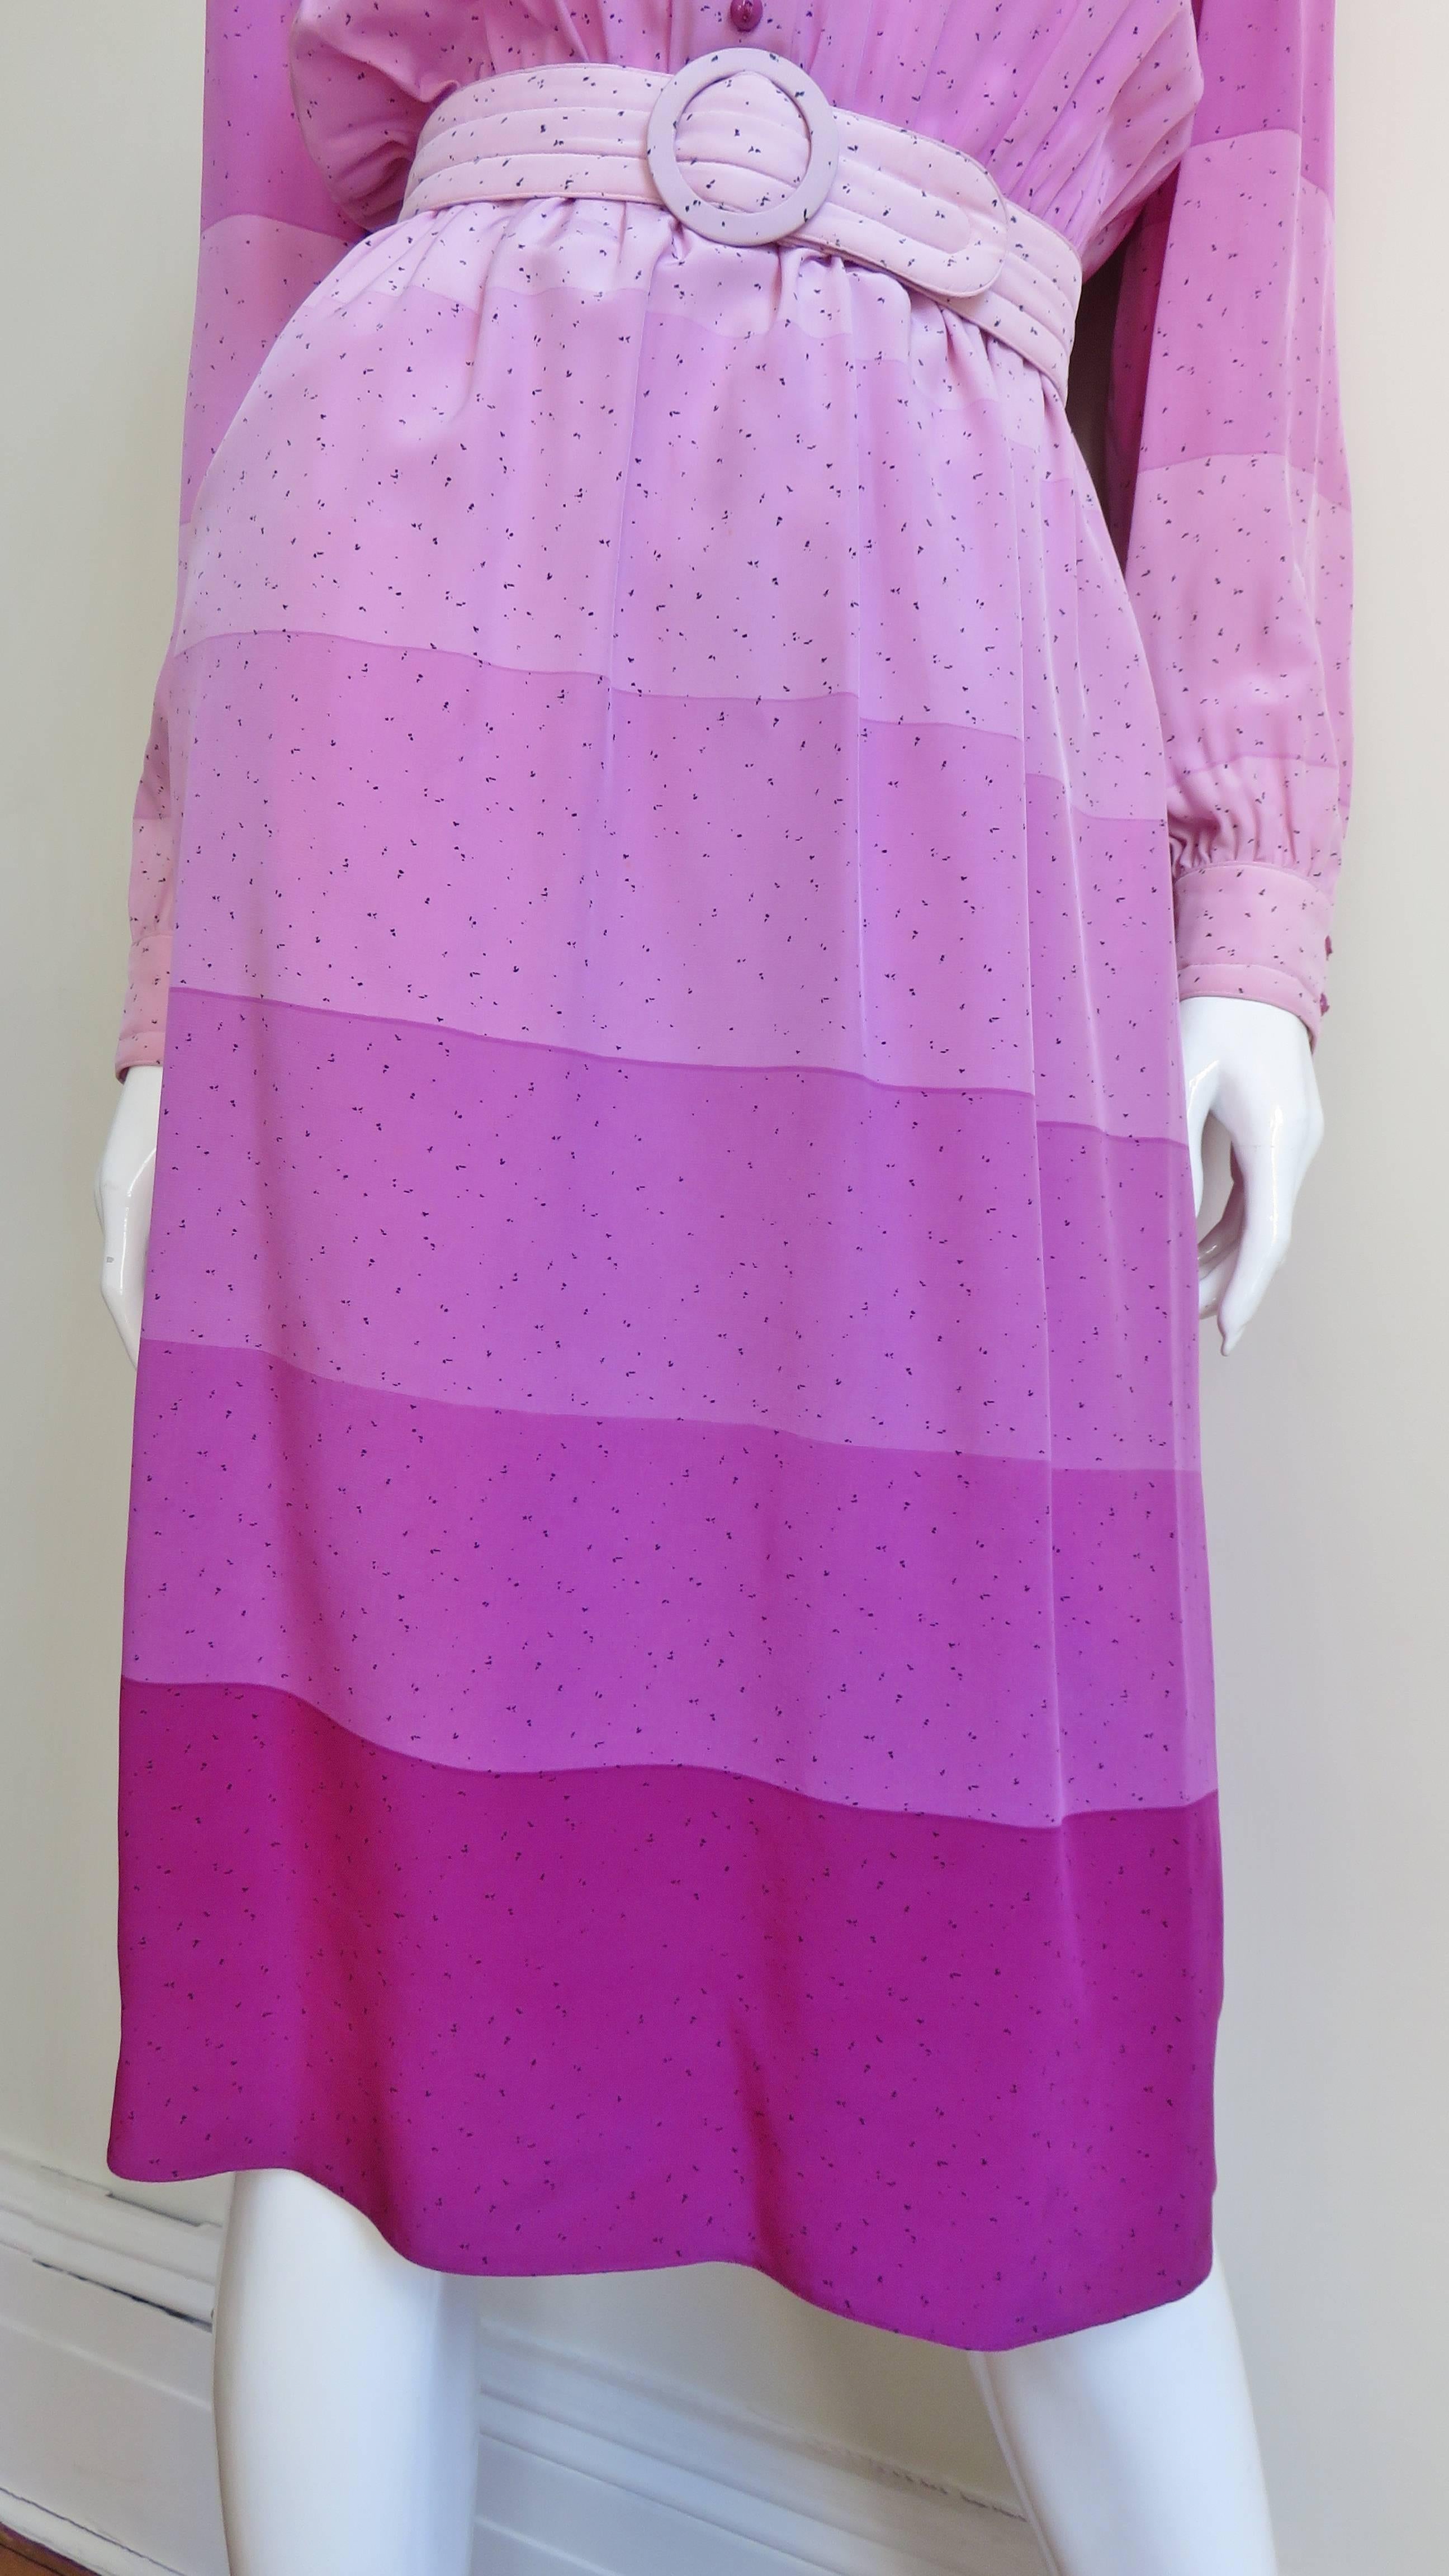 Louis Feraud Silk Ombre Striped Shirtwaist Dress 1970s In Good Condition For Sale In Water Mill, NY